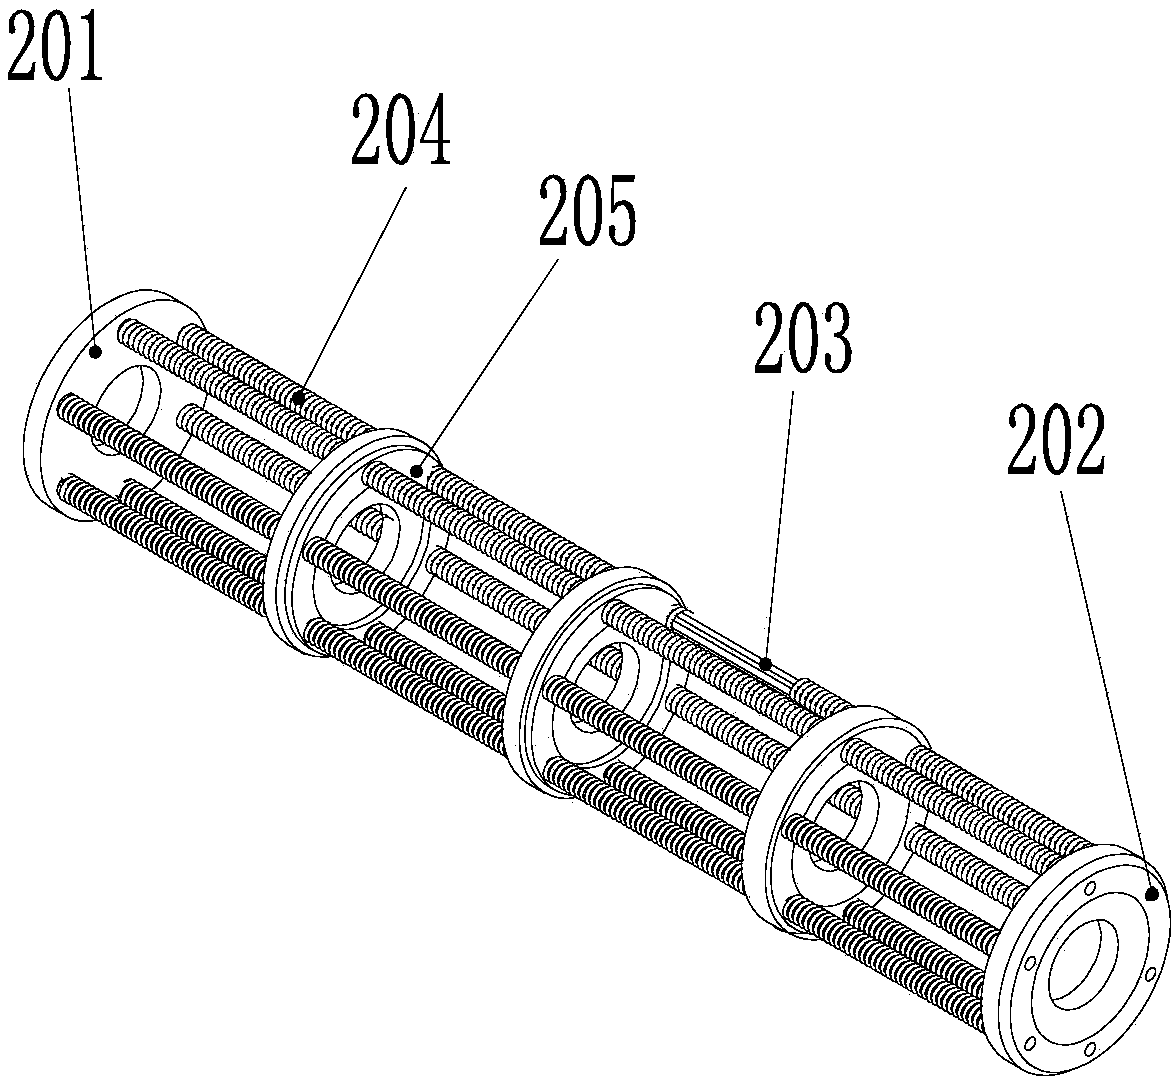 Torque wrench based on shape memory alloy